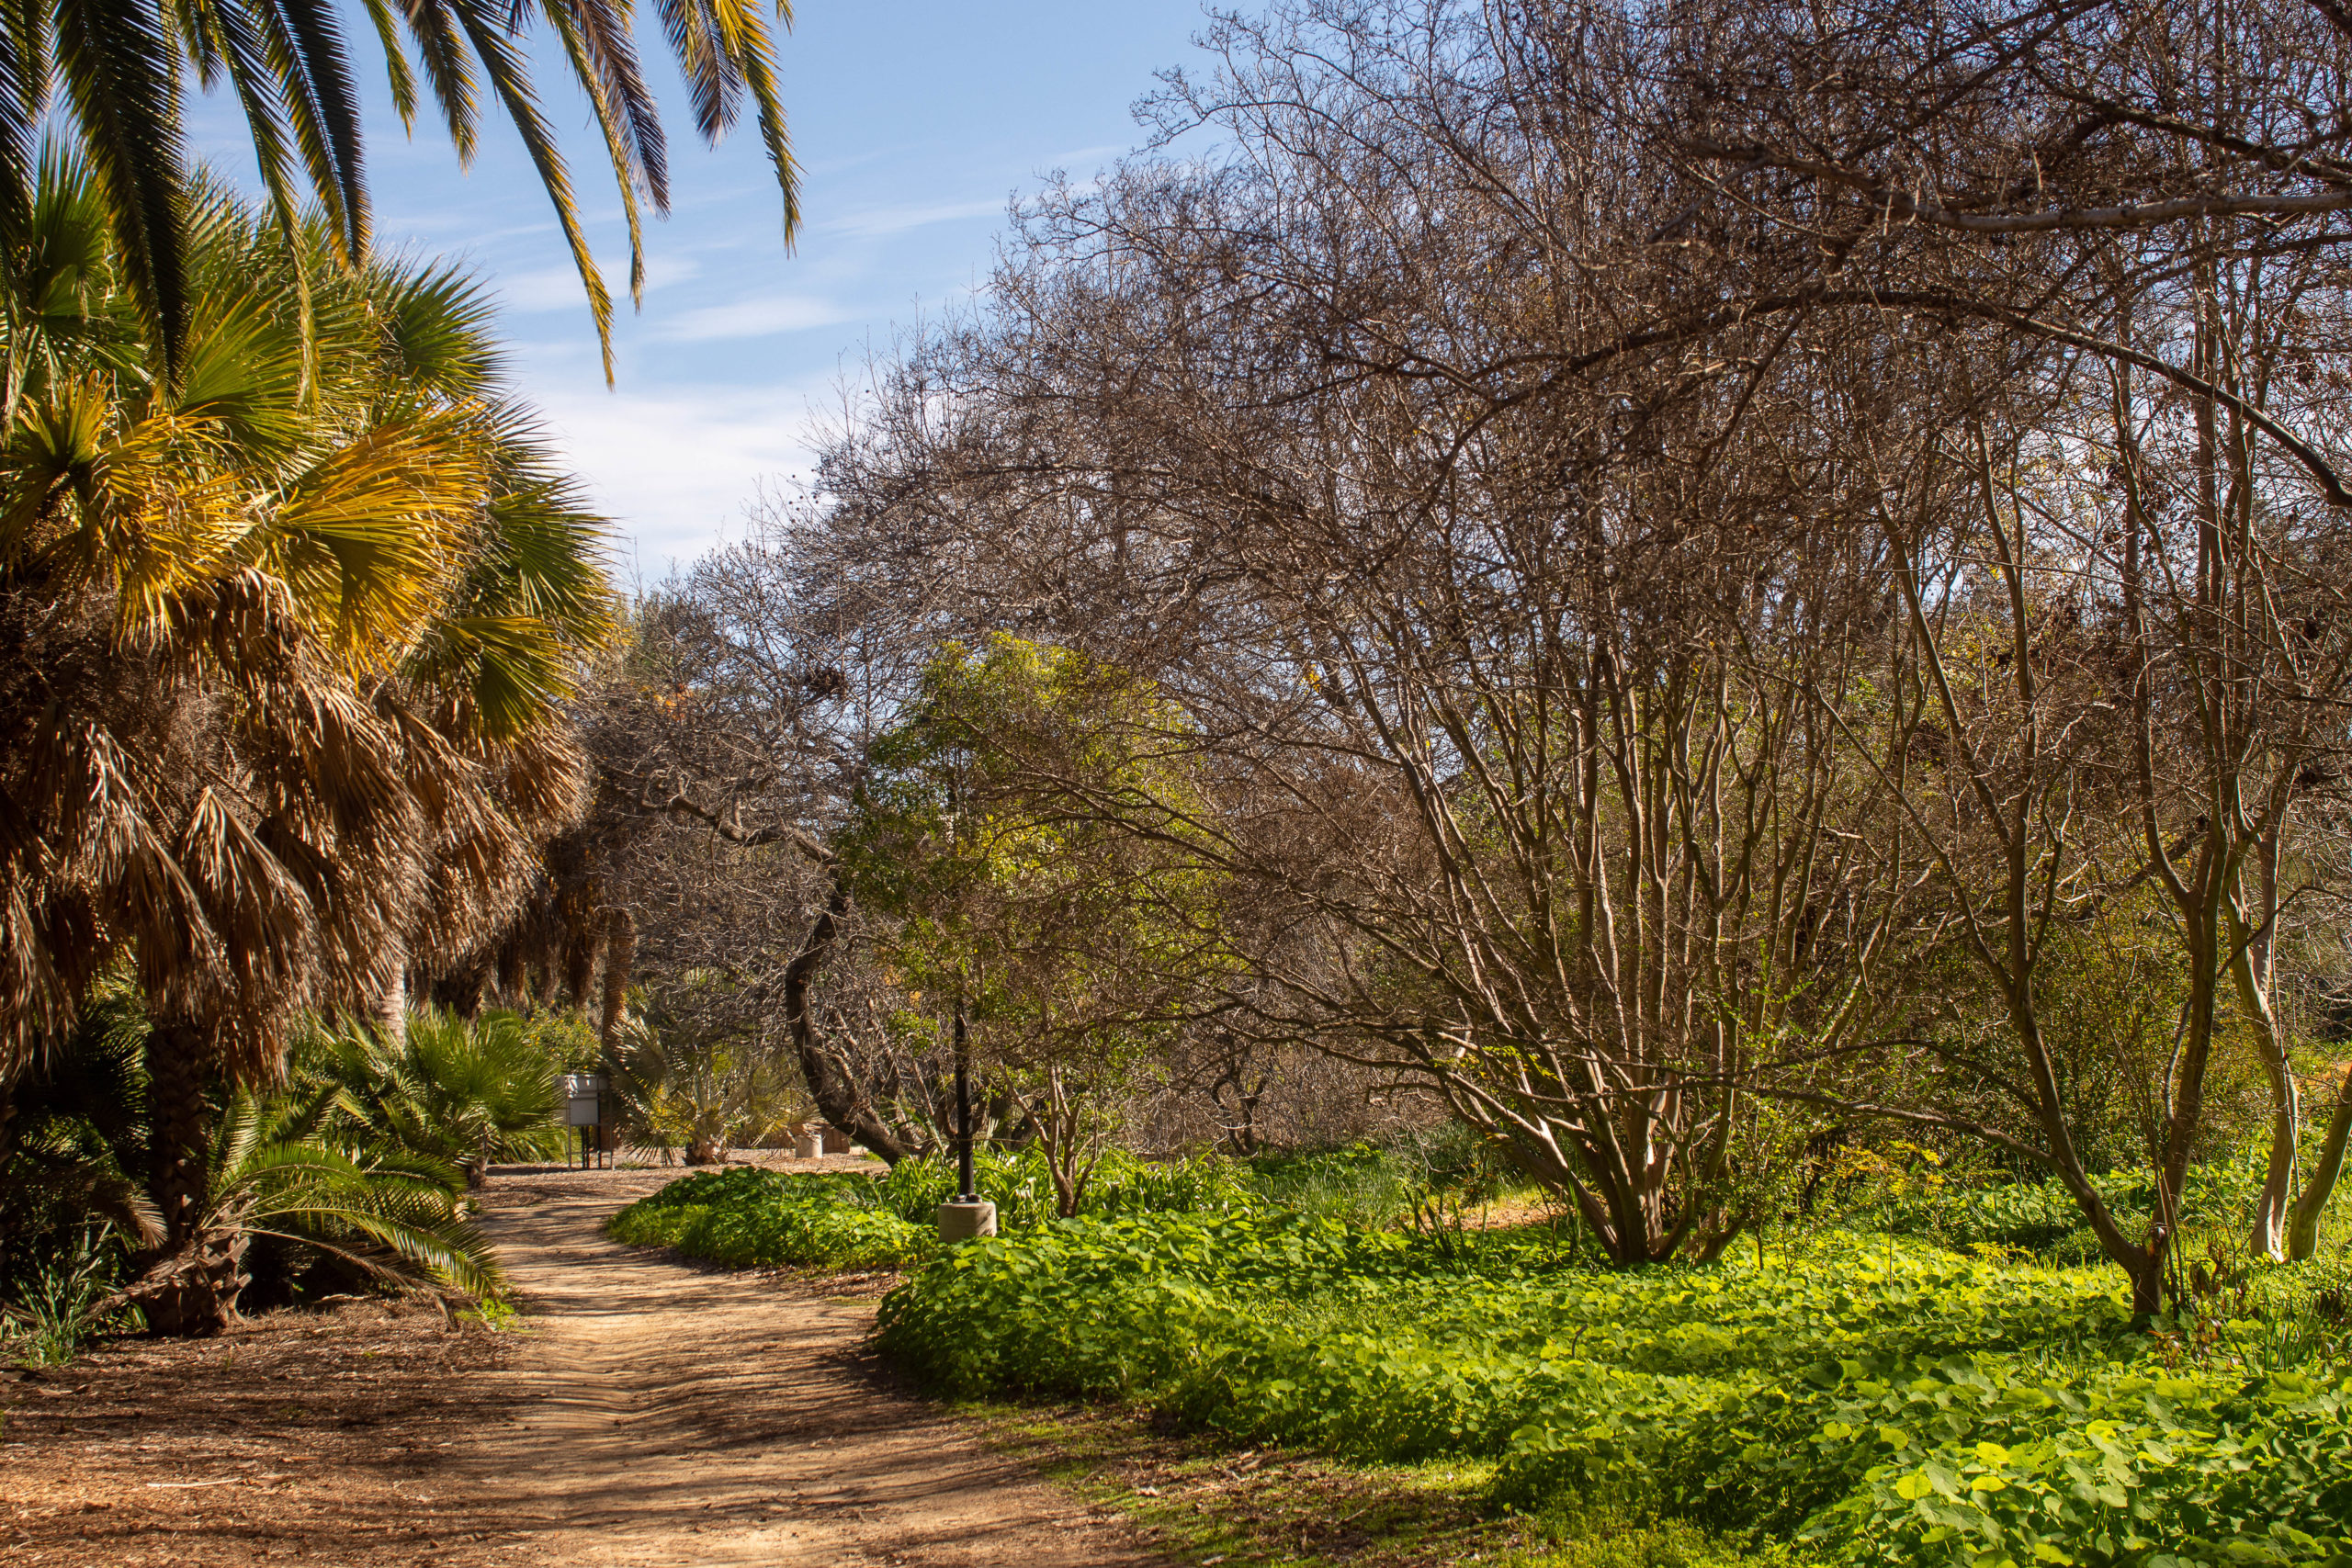 Trees and bushes line the path at the Fullerton Arboretum on Monday, January 23, 2023.